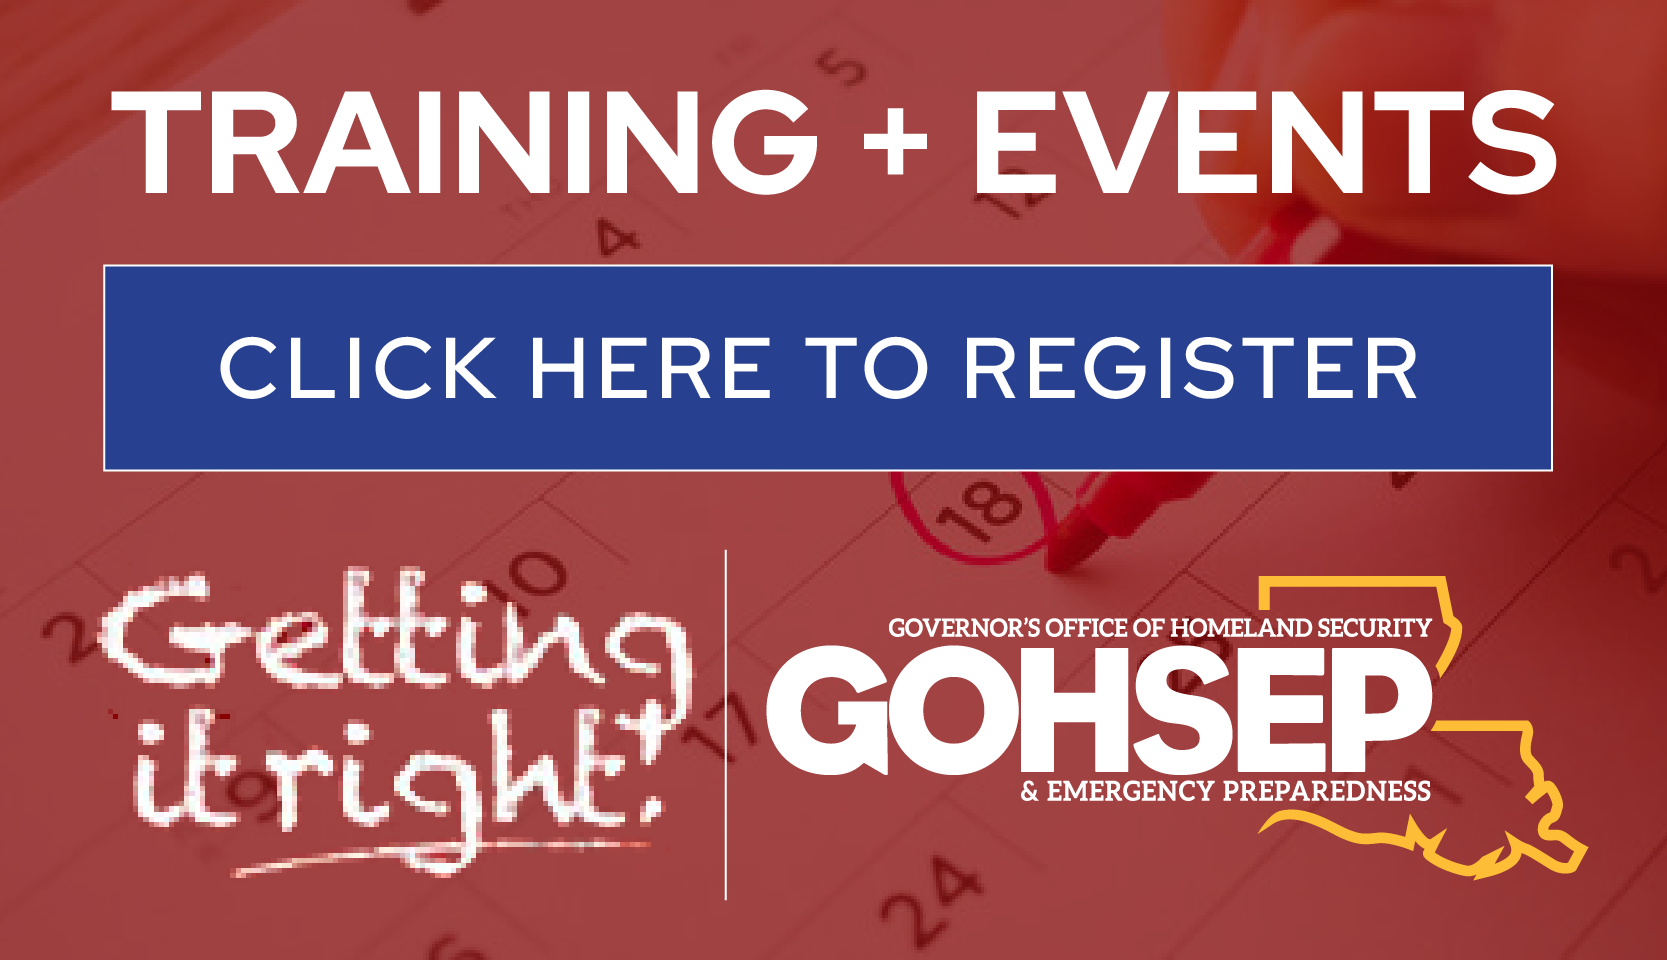 Training + Events - Click Here to Register